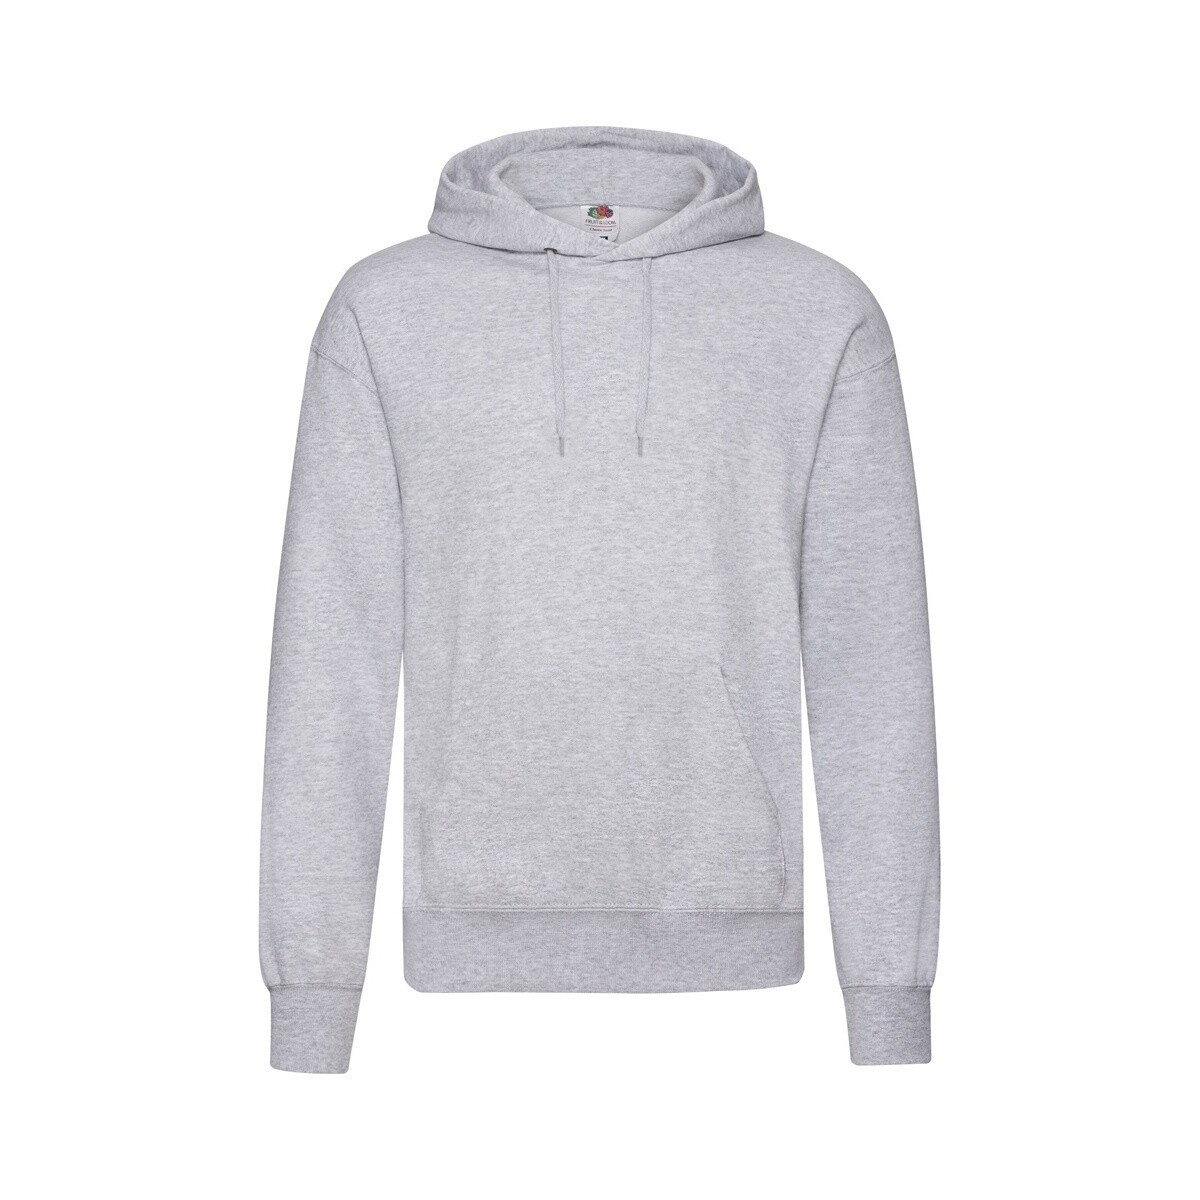 textil Sudaderas Fruit Of The Loom Classic Gris